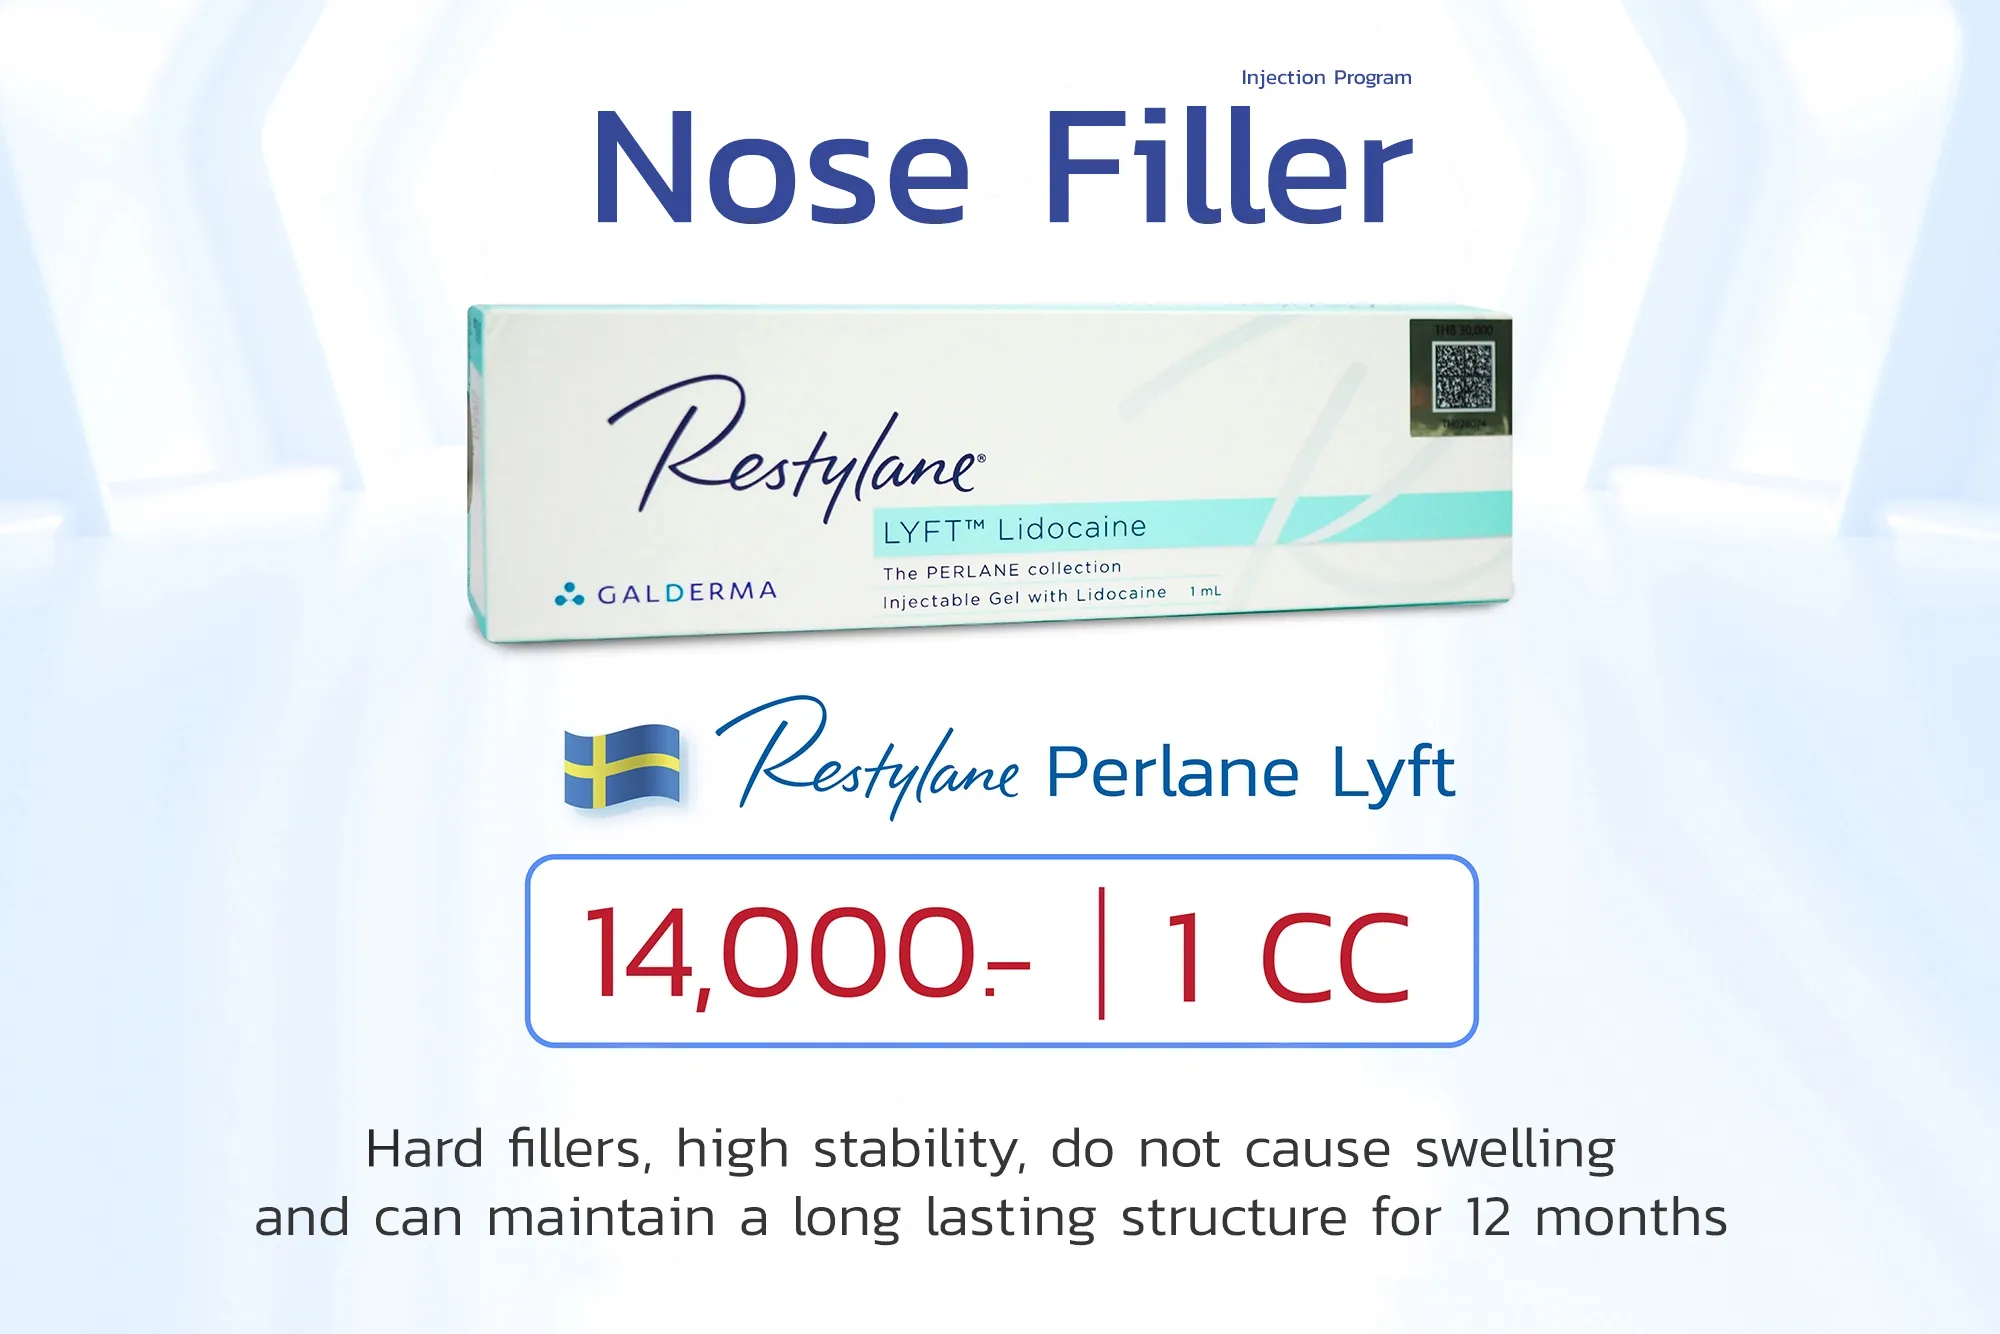 Nose filler injection prices